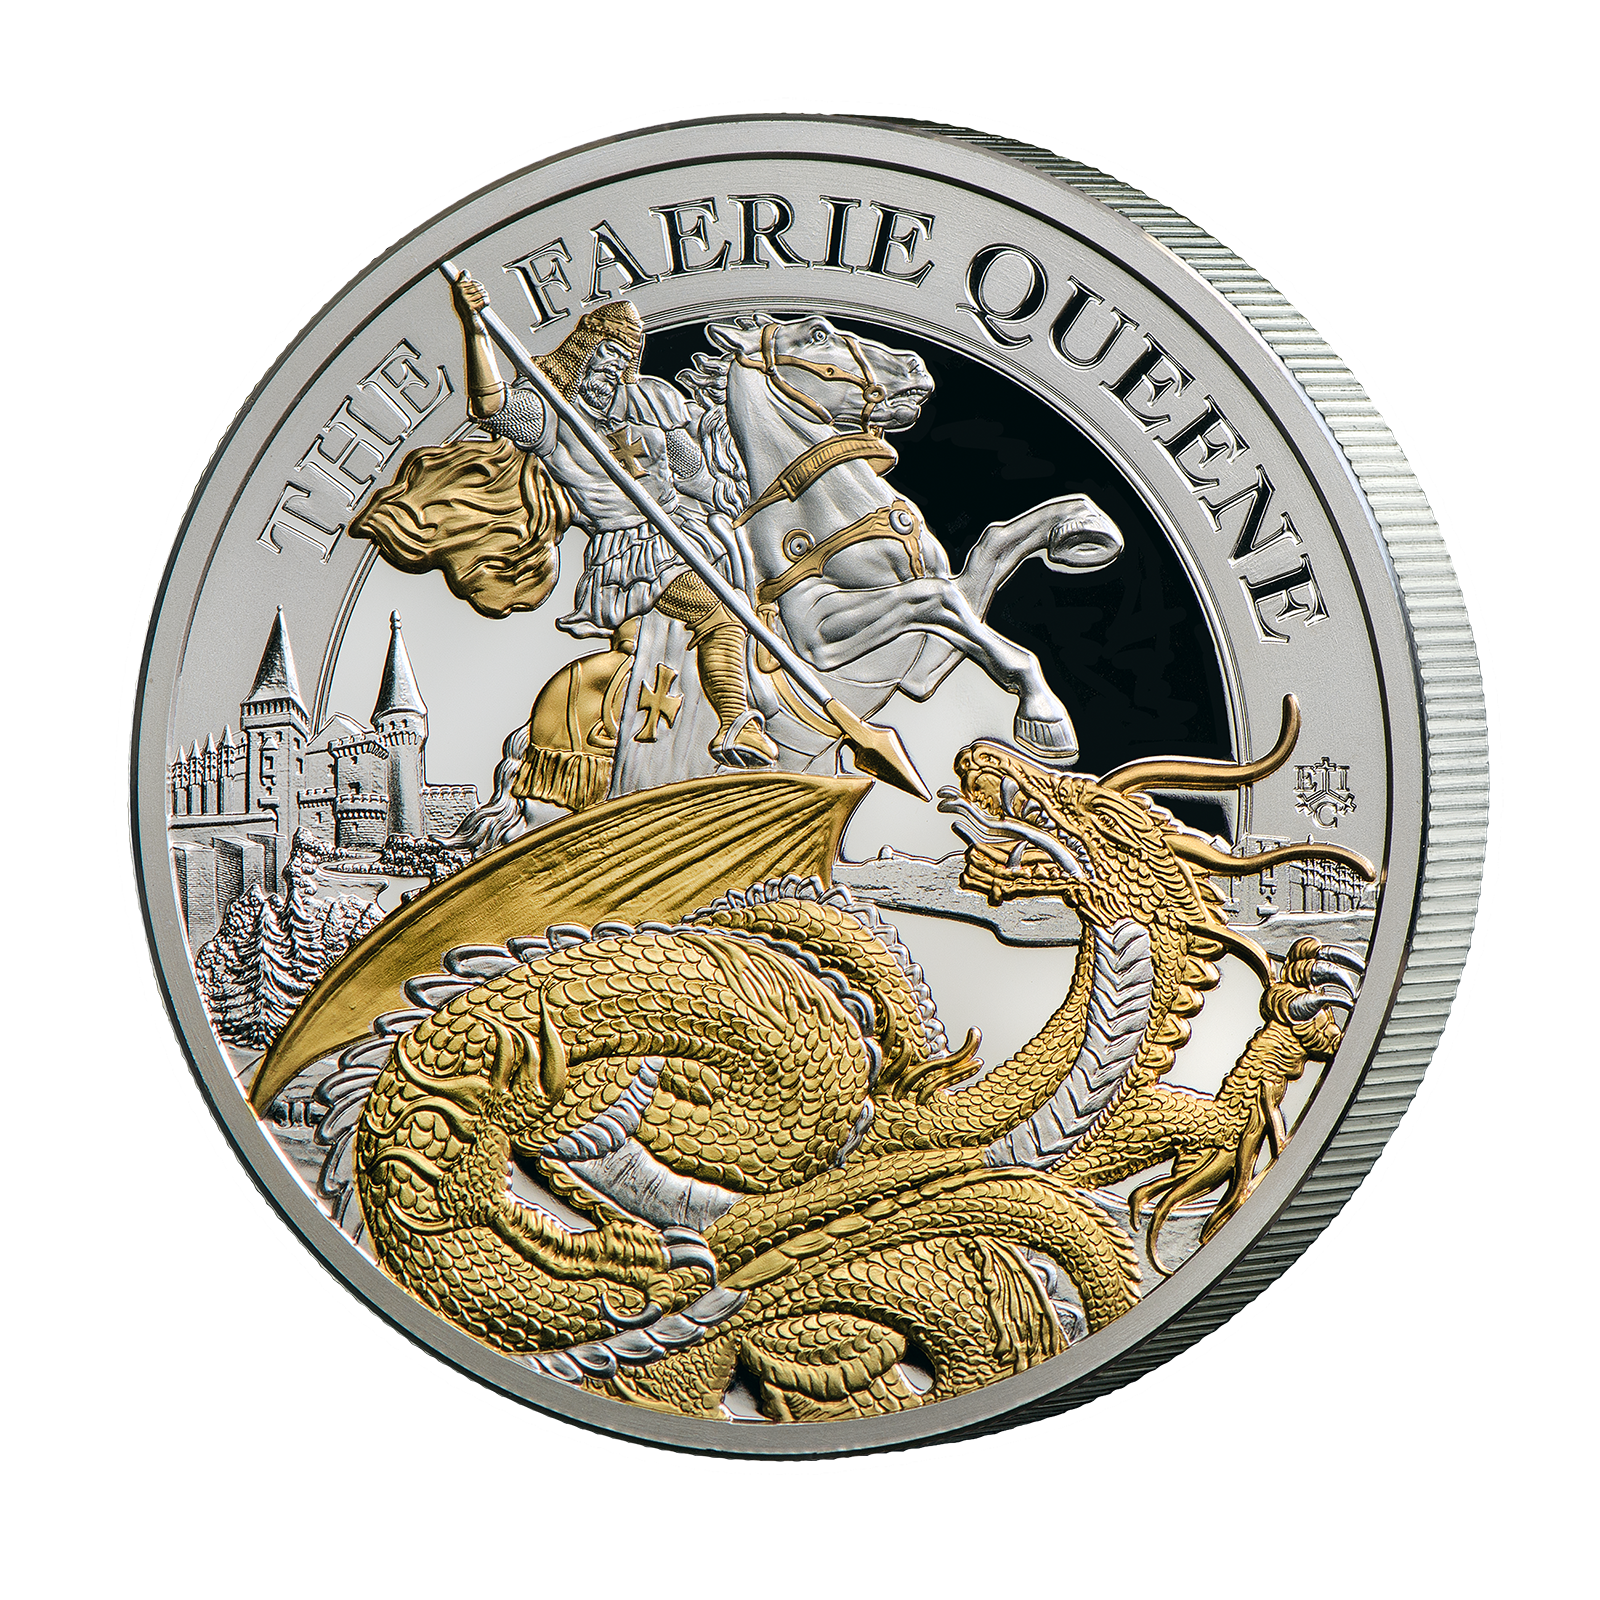 2024 Faerie Queene Redcrosse & the Dragon 2oz Silver Proof Coin with Selective Gold Plating